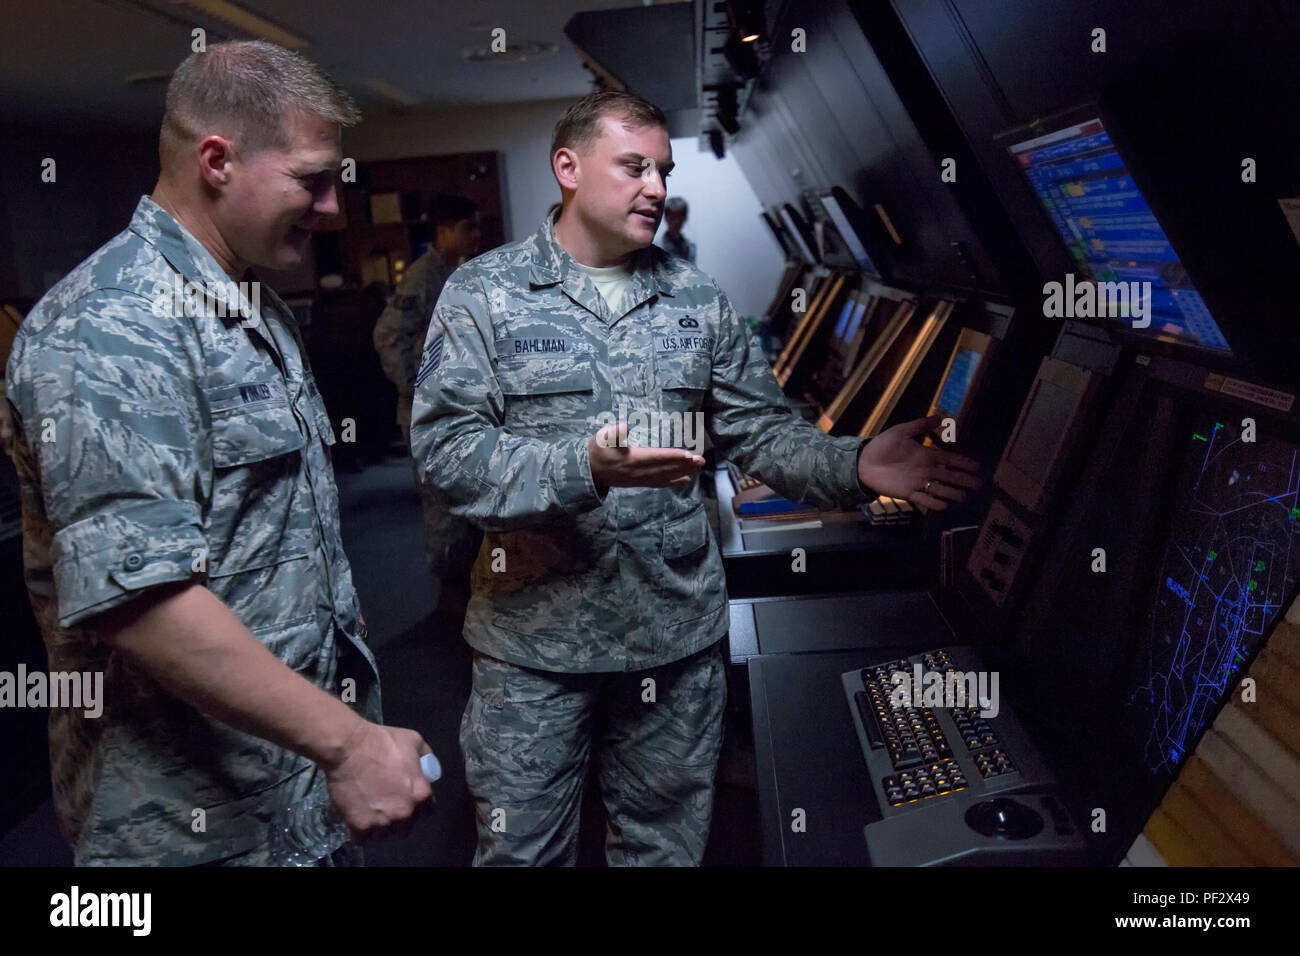 Tech. Sgt. Christopher Bahlman, 374th Operations Support Squadron air traffic control specialist, gives a brief on the operation of an approach control station to Brig. Gen. Michael Winkler, 5th Air Force vice commander, during his immersion tour at Yokota Air Base, Japan, Aug. 2, 2016. Yokota’s Radar Approach Control Airmen monitor and control aircraft over a 20,000 square mile area. (U.S. Air Force photo by Yasuo Osakabe/Released) Stock Photo